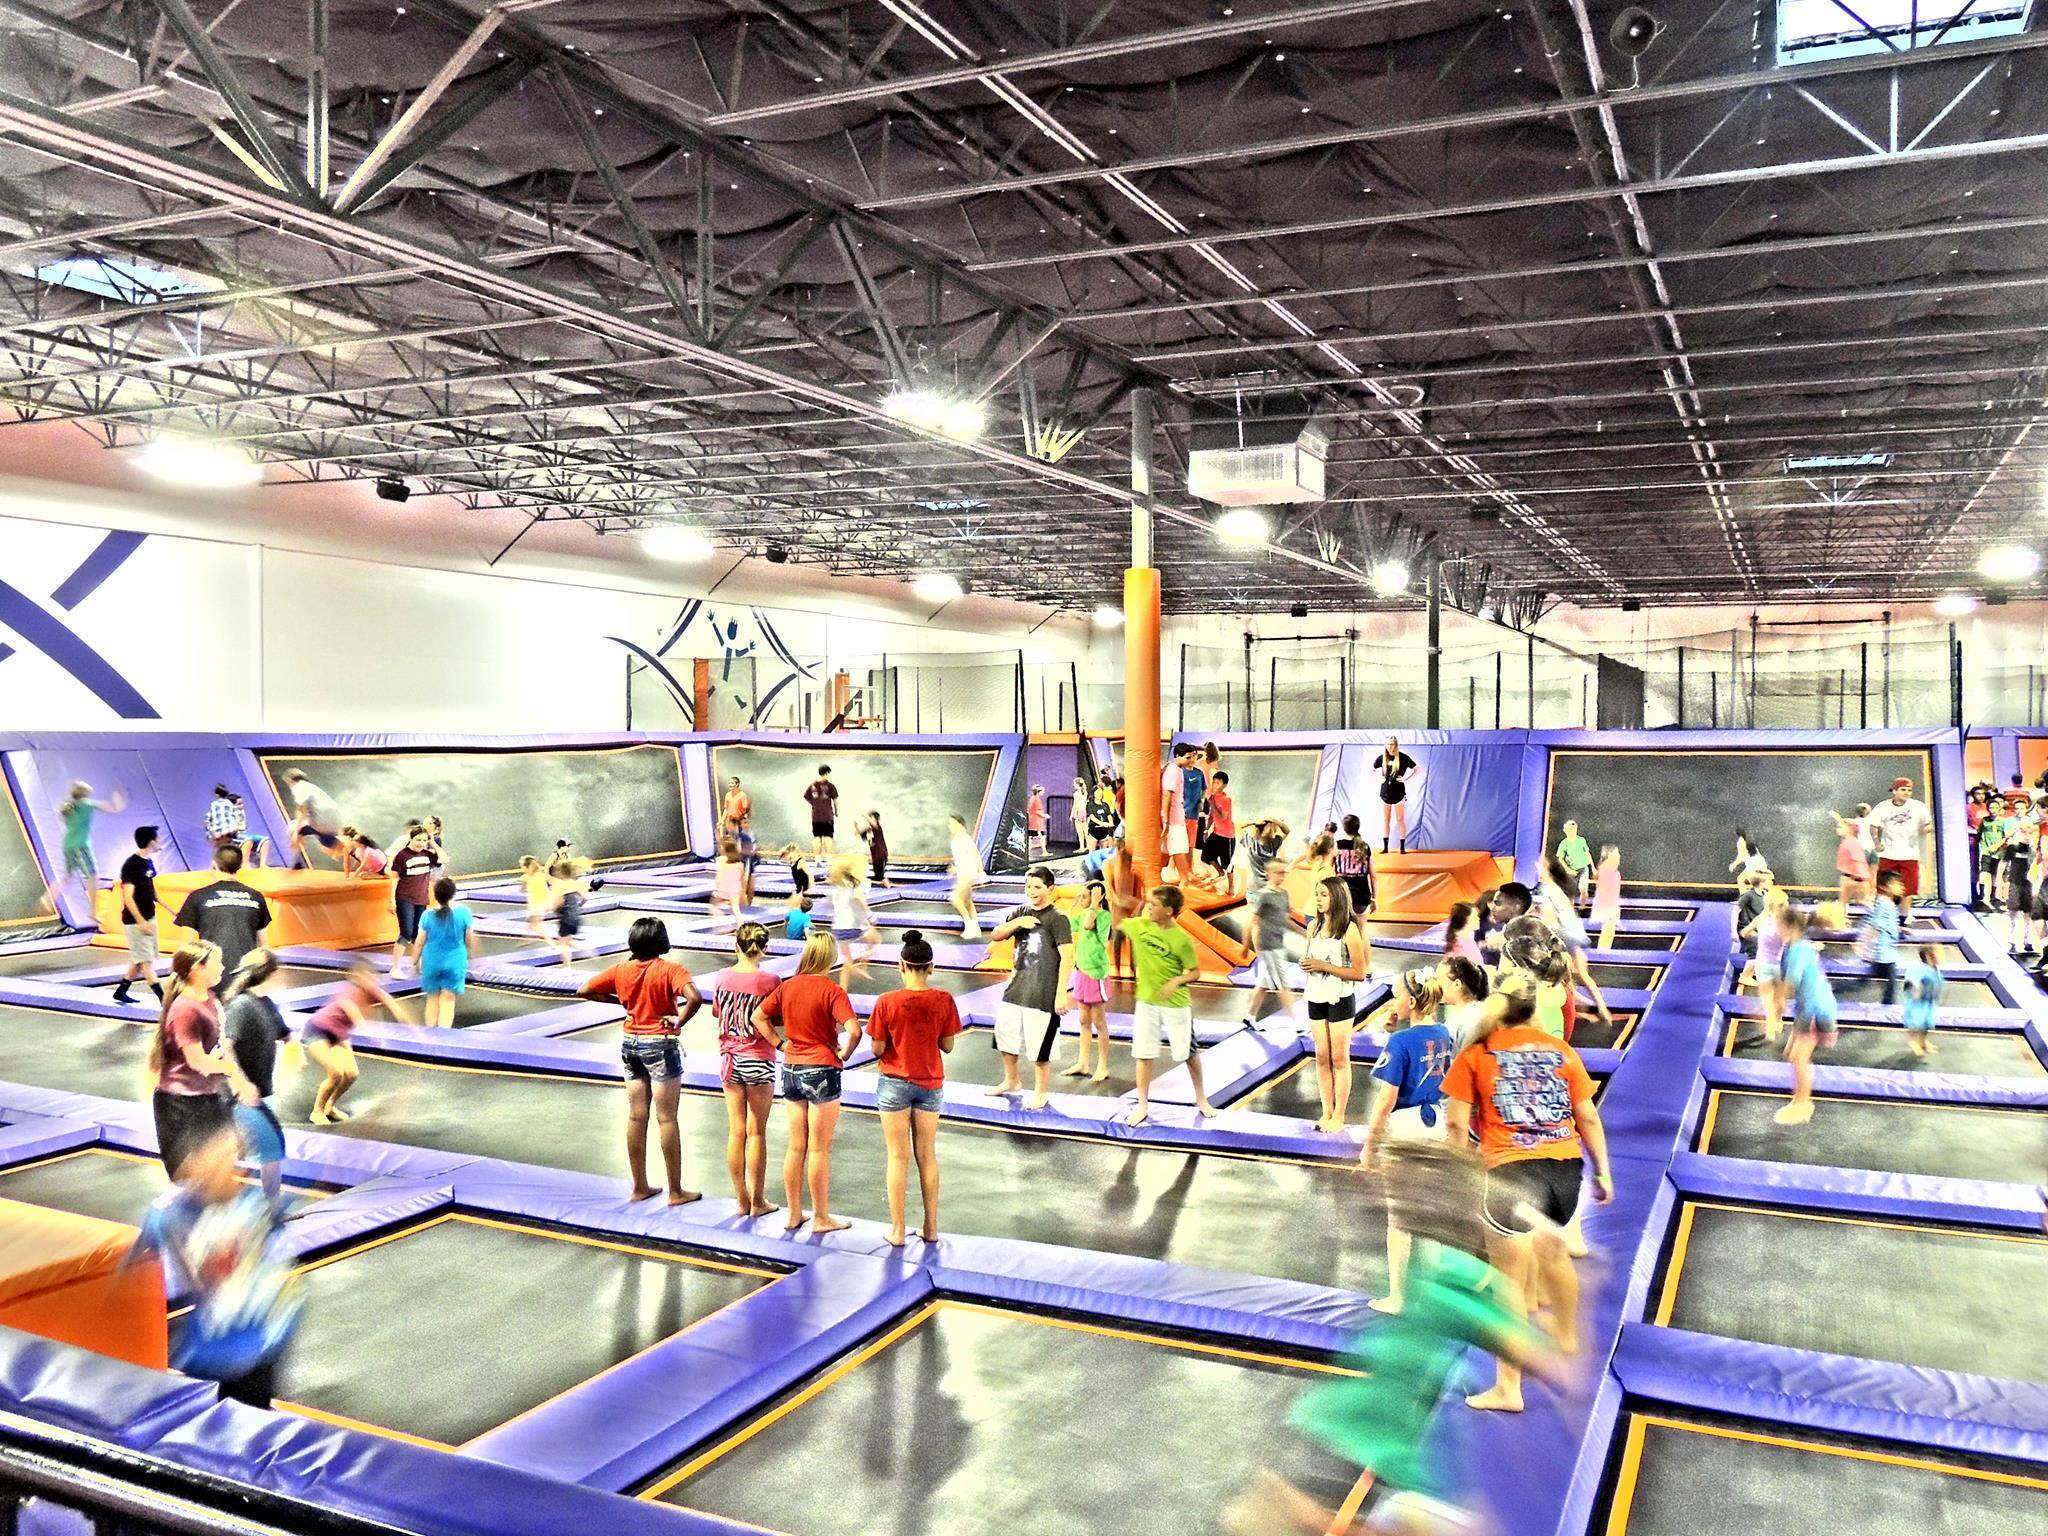 for-60-minutes-of-jump-time-for-people-75-at-altitude-trampoline-park